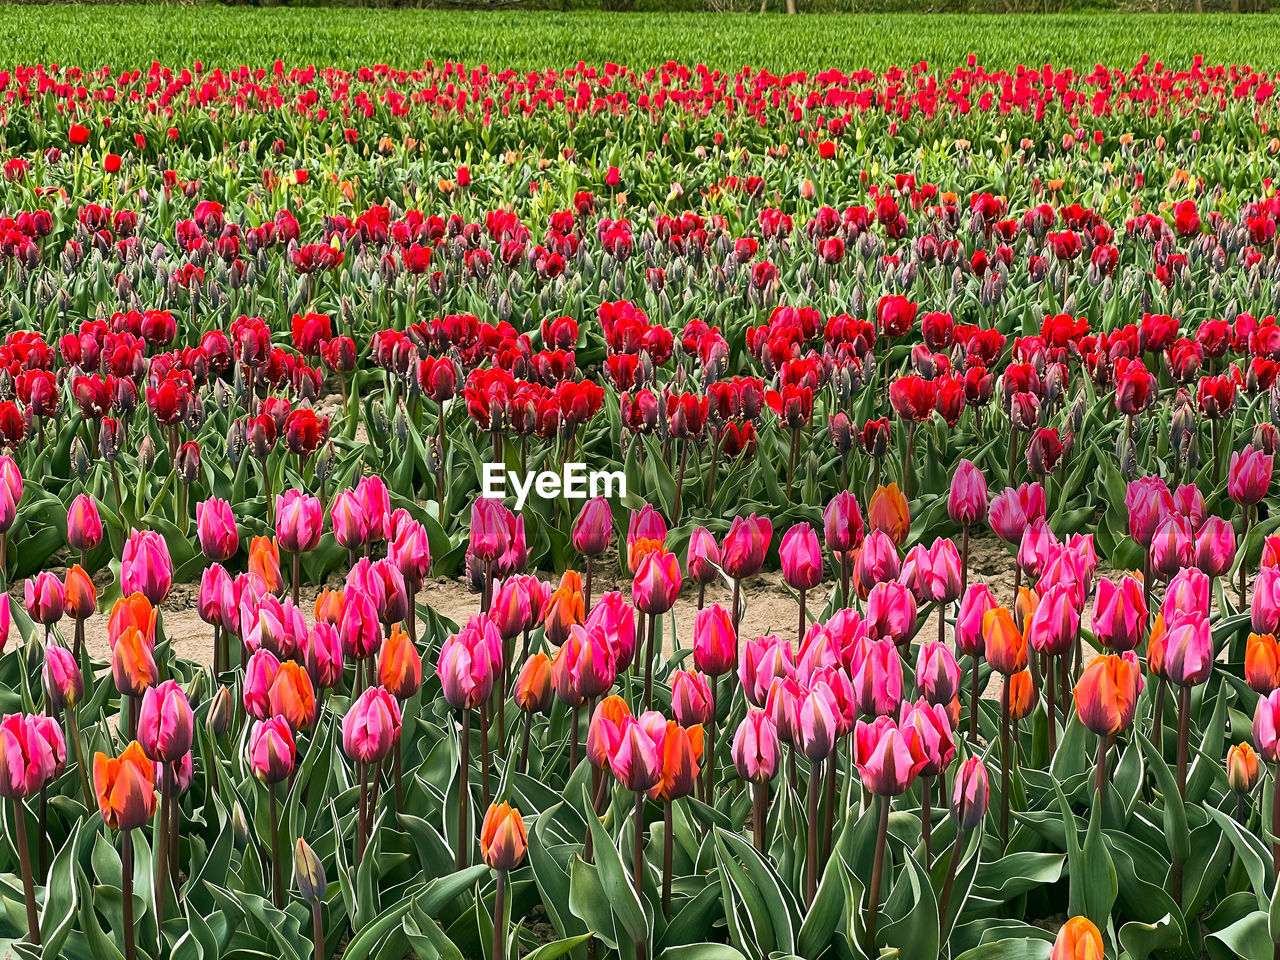 plant, tulip, flower, flowering plant, beauty in nature, freshness, growth, field, nature, land, red, fragility, flowerbed, abundance, landscape, no people, petal, multi colored, inflorescence, pink, flower head, day, springtime, environment, outdoors, rural scene, close-up, green, botany, tranquility, scenics - nature, vibrant color, agriculture, backgrounds, grass, blossom